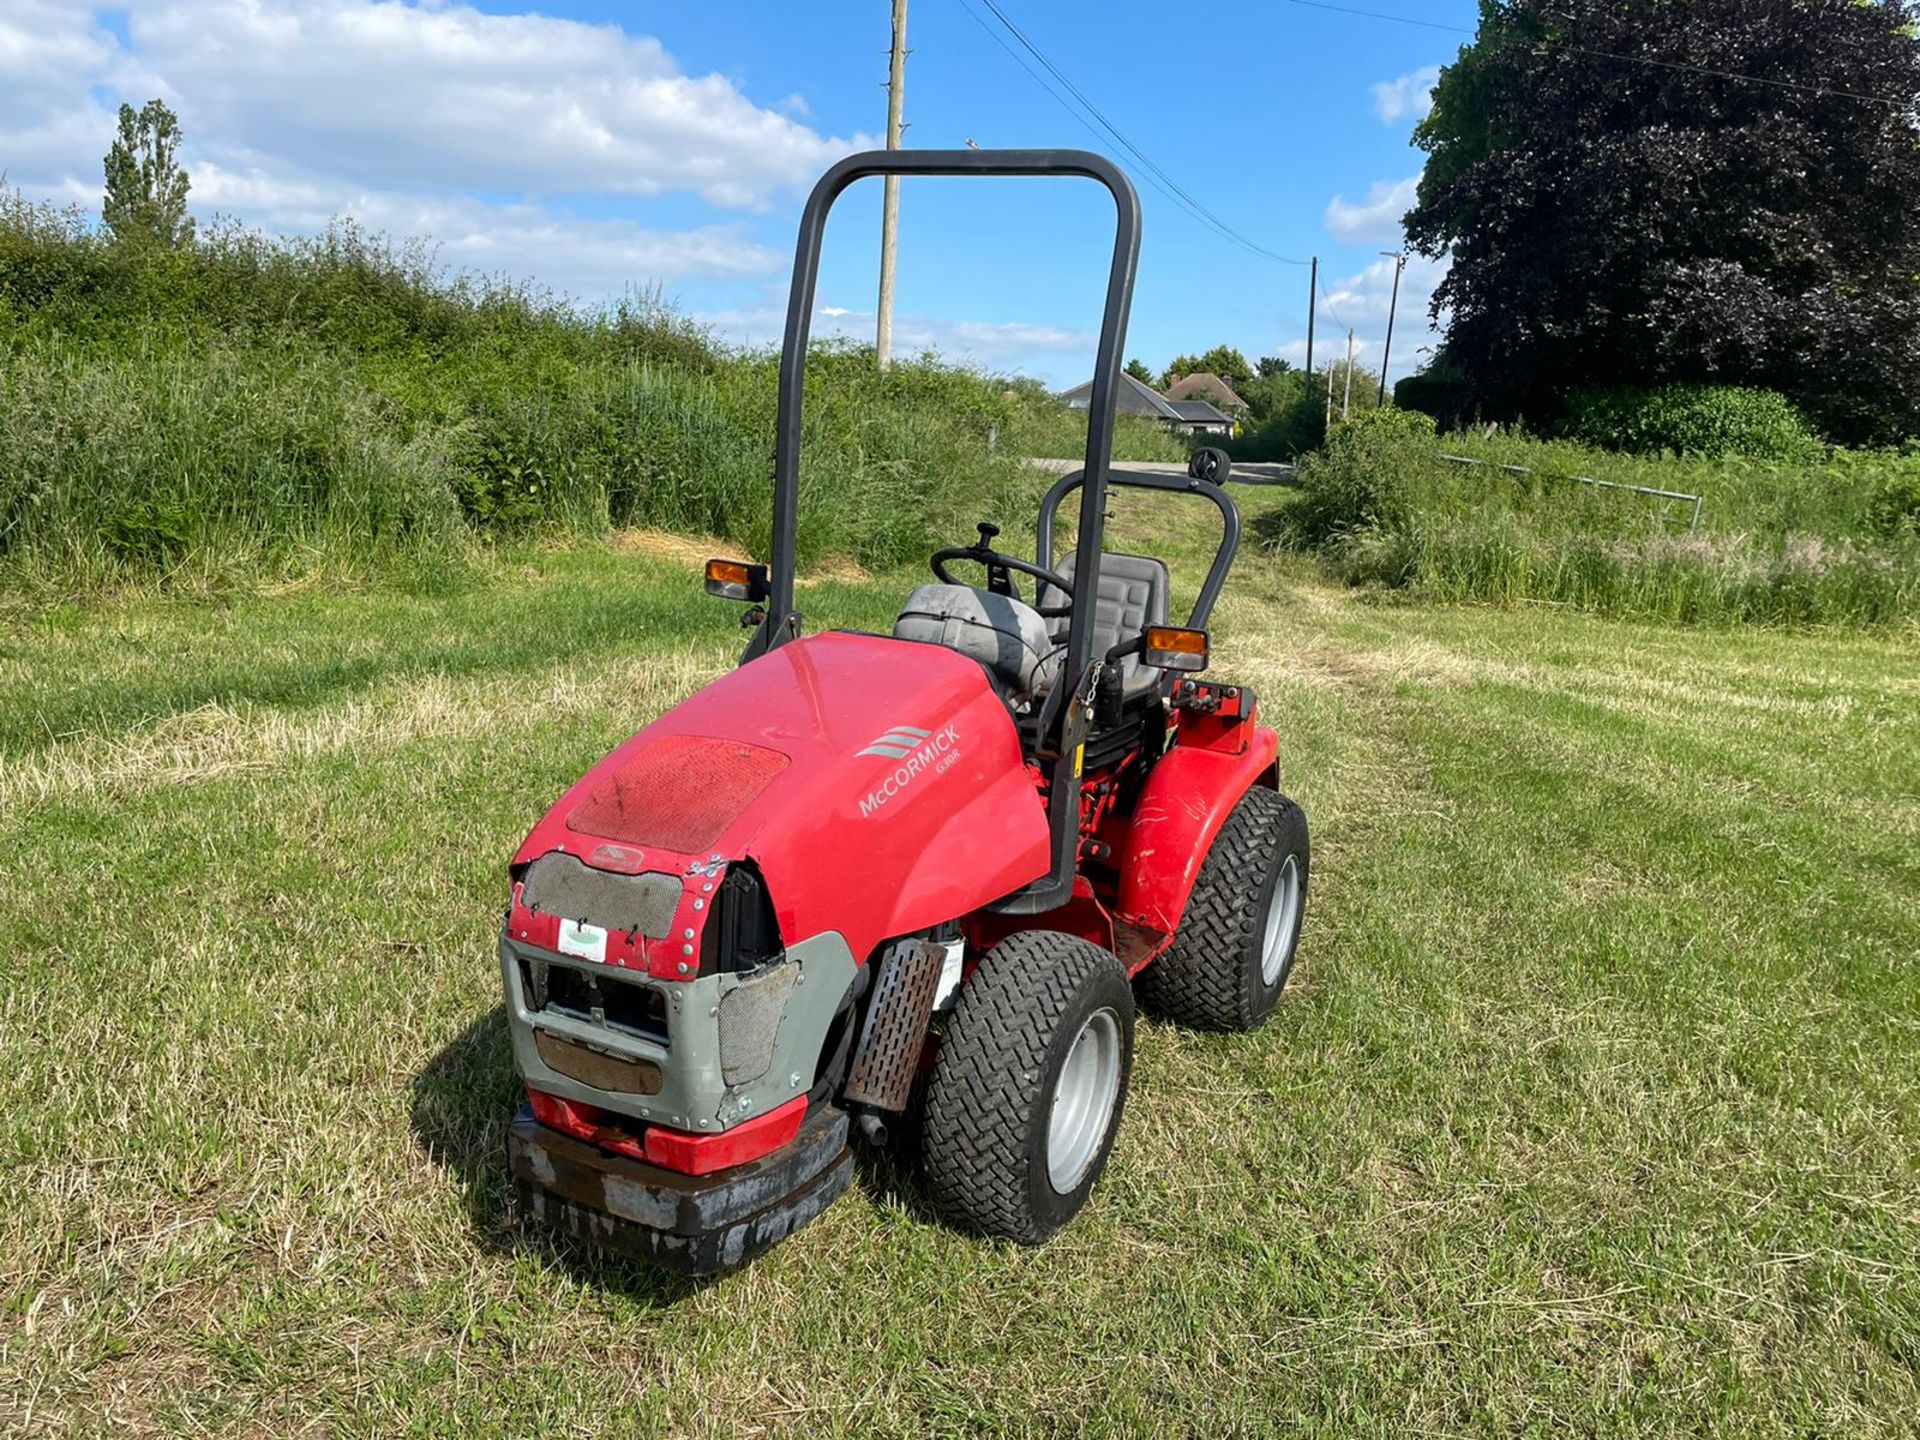 2003 McCORMICK G30R REVERSE COMPACT TRACTOR, RUNS AND DRIVES, SHOWING 397 HOURS *PLUS VAT* - Image 3 of 13